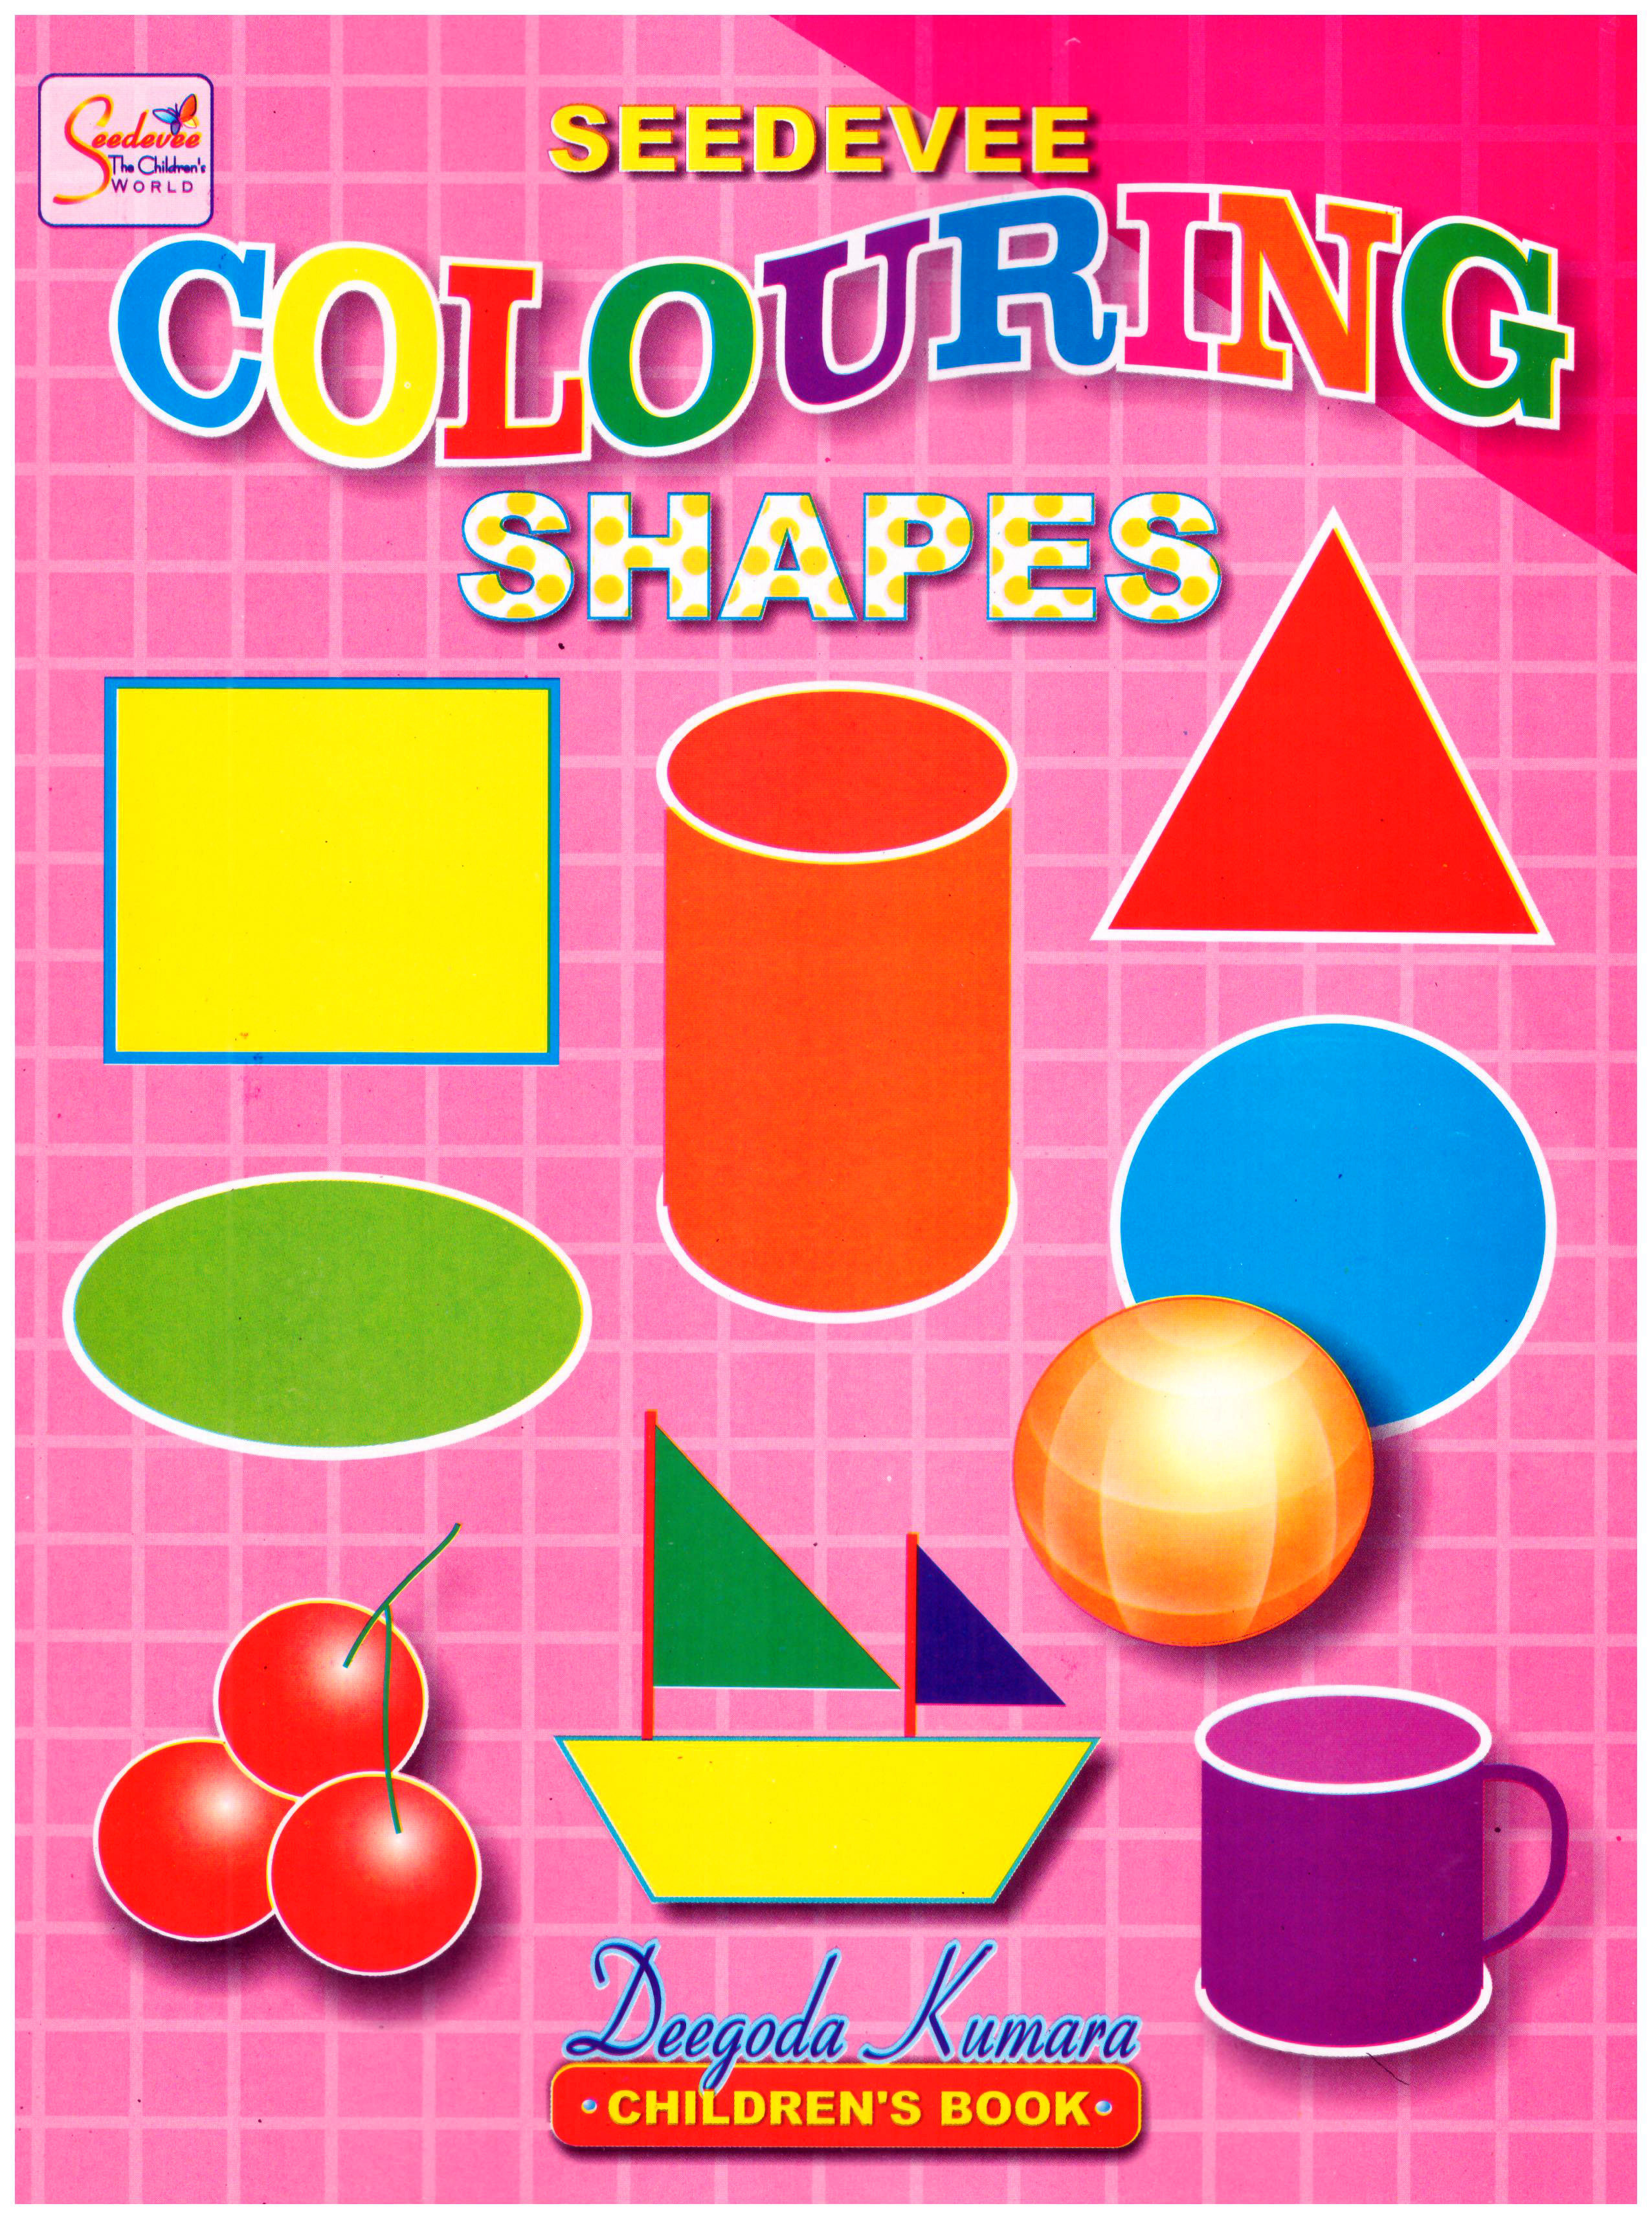 Seedevee Colouring Shapes